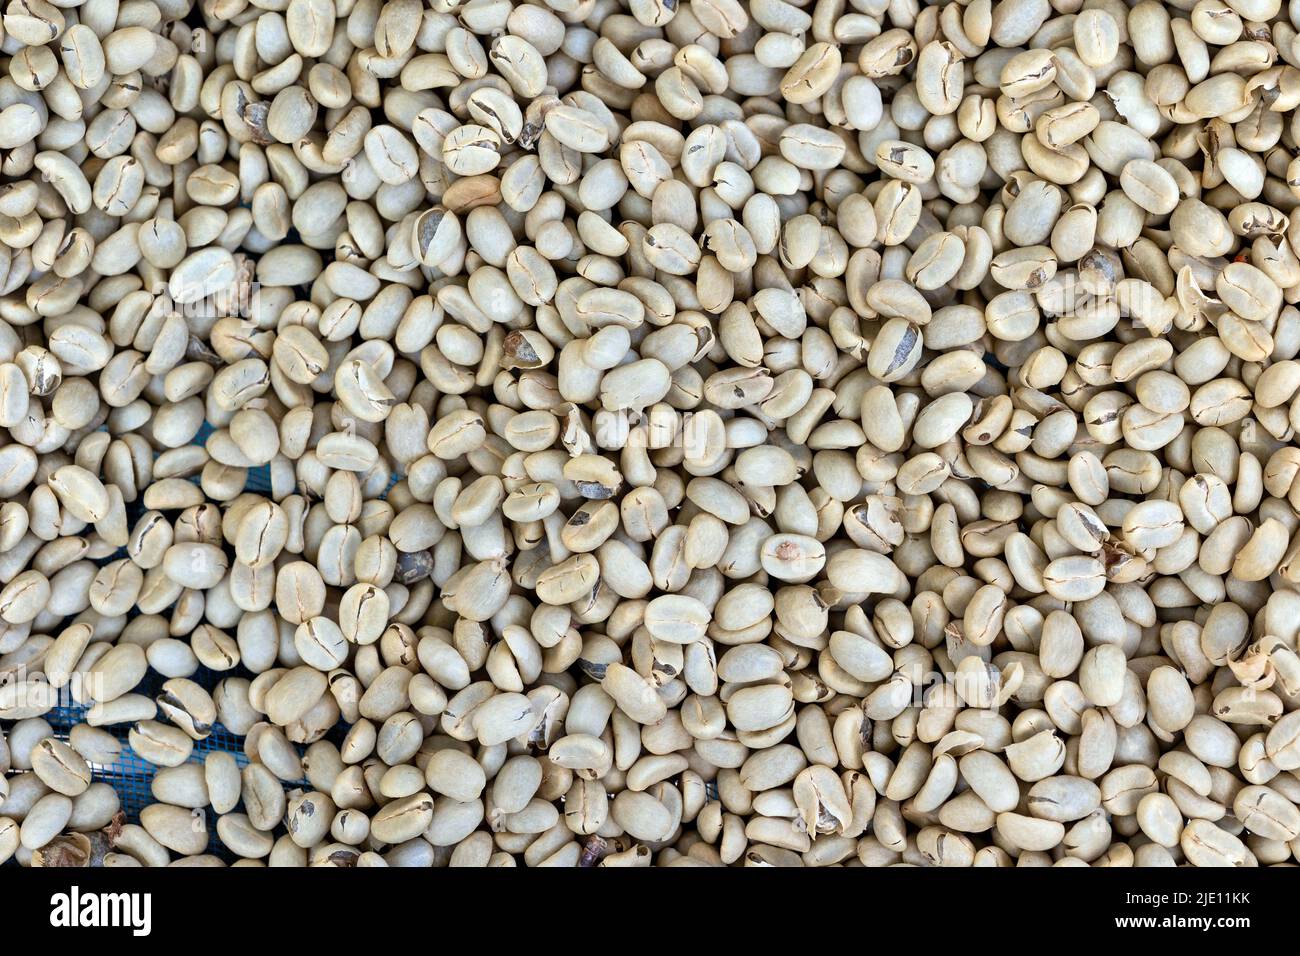 Background of fresh coffee grains drying under the sun Stock Photo